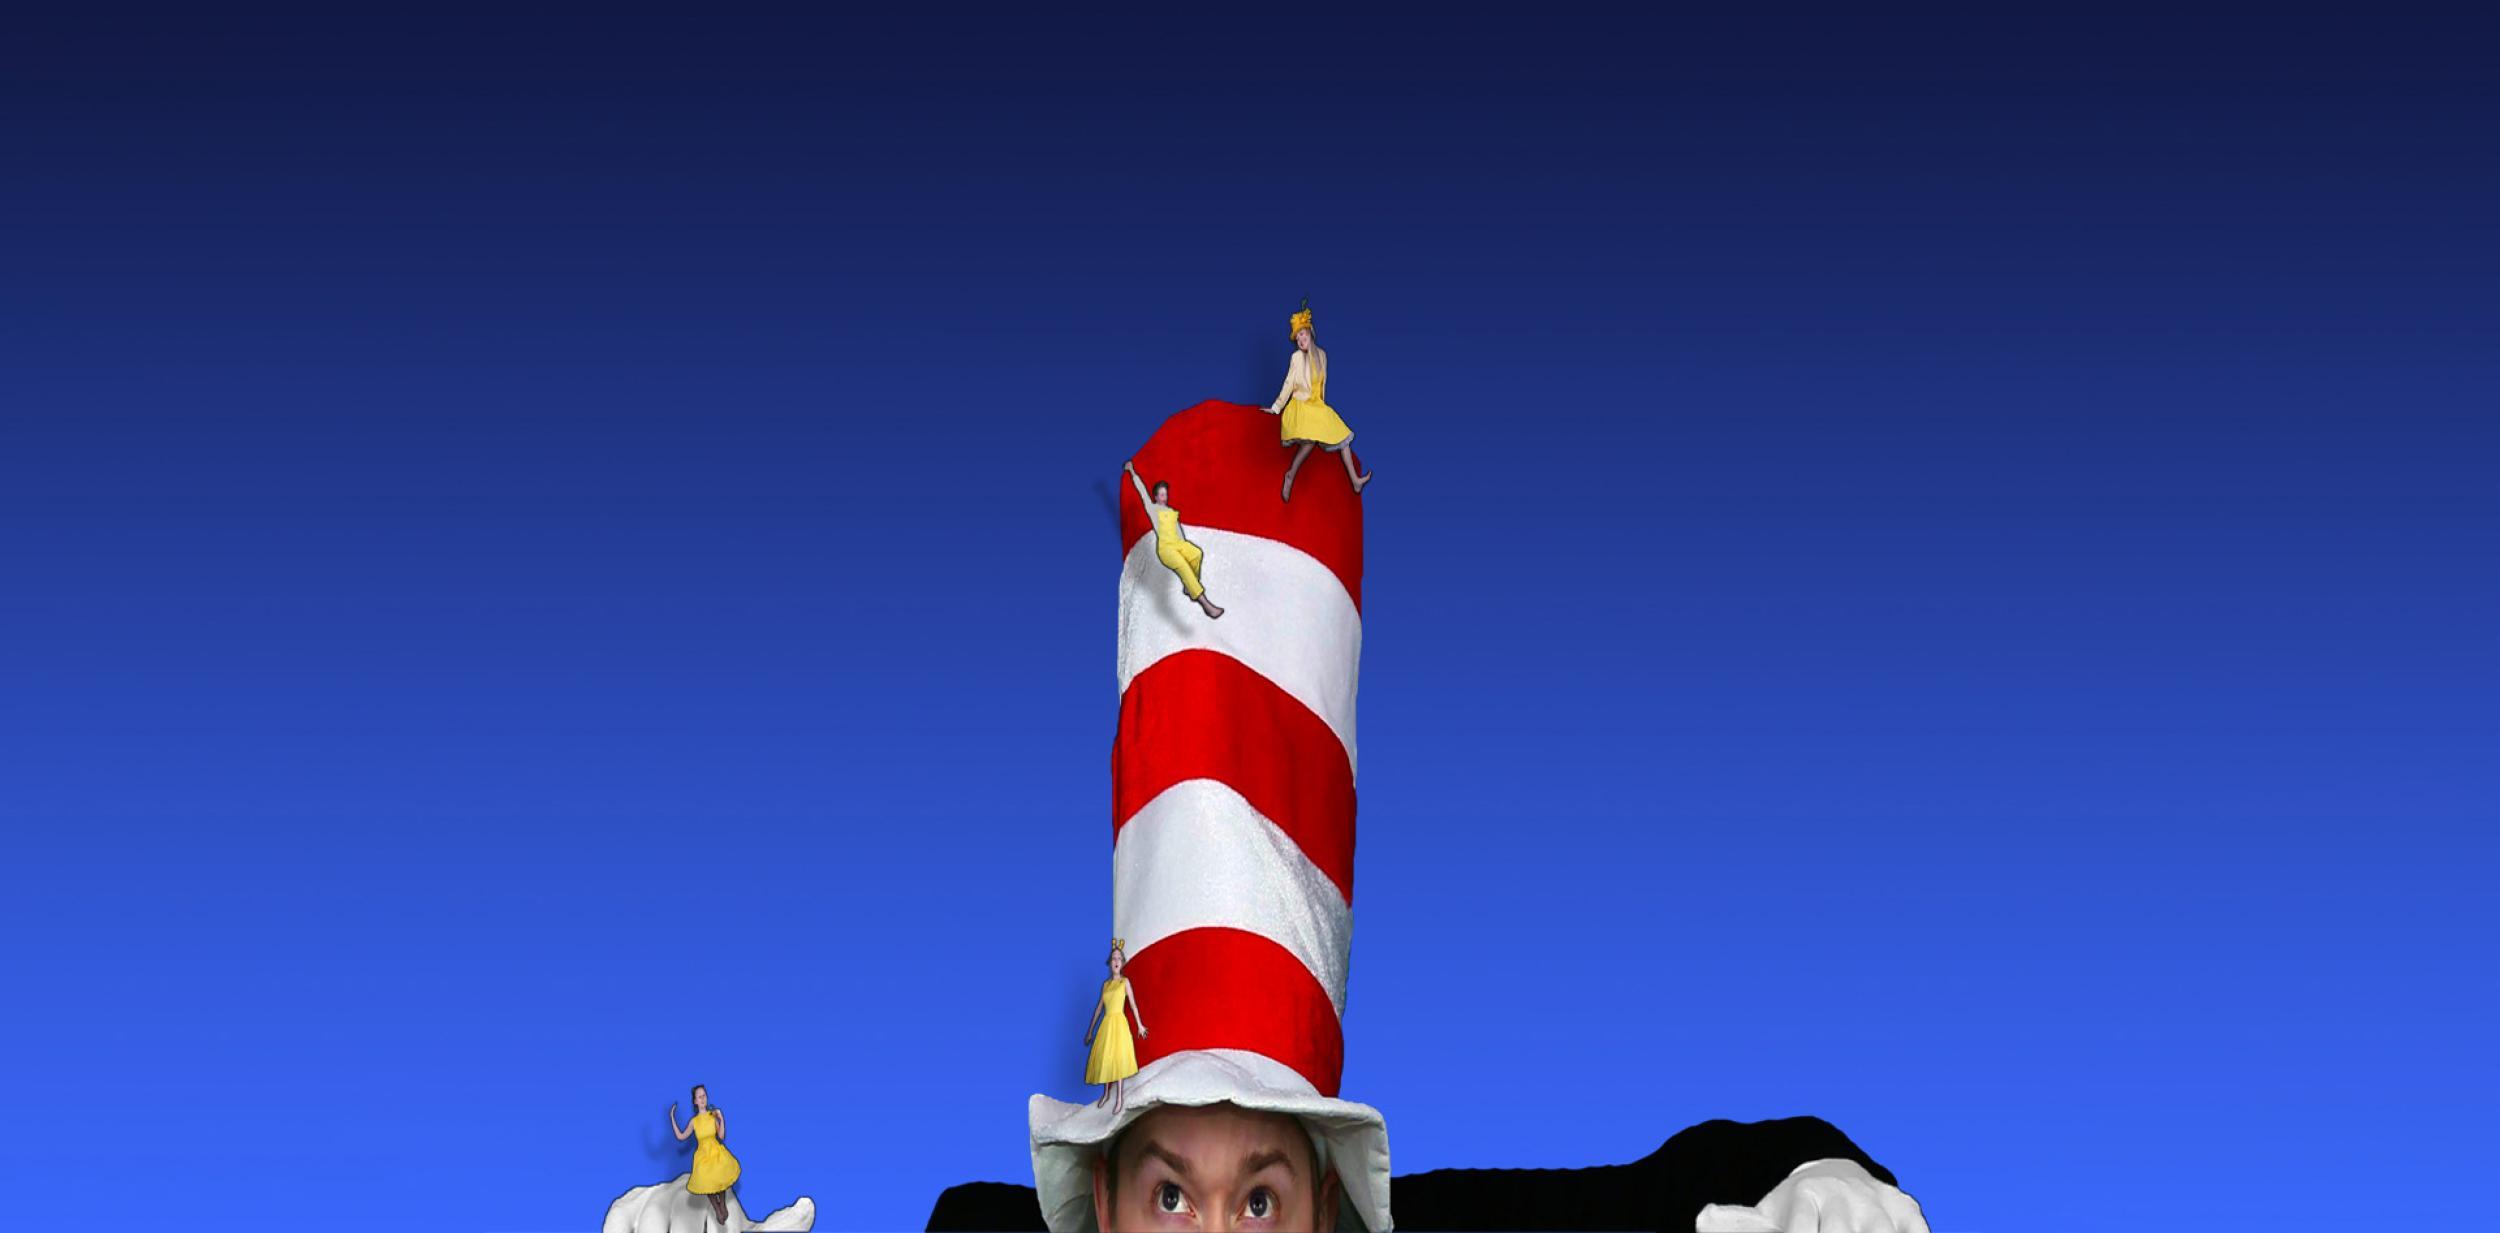 Man in a large red and white stripey hat against a blue background